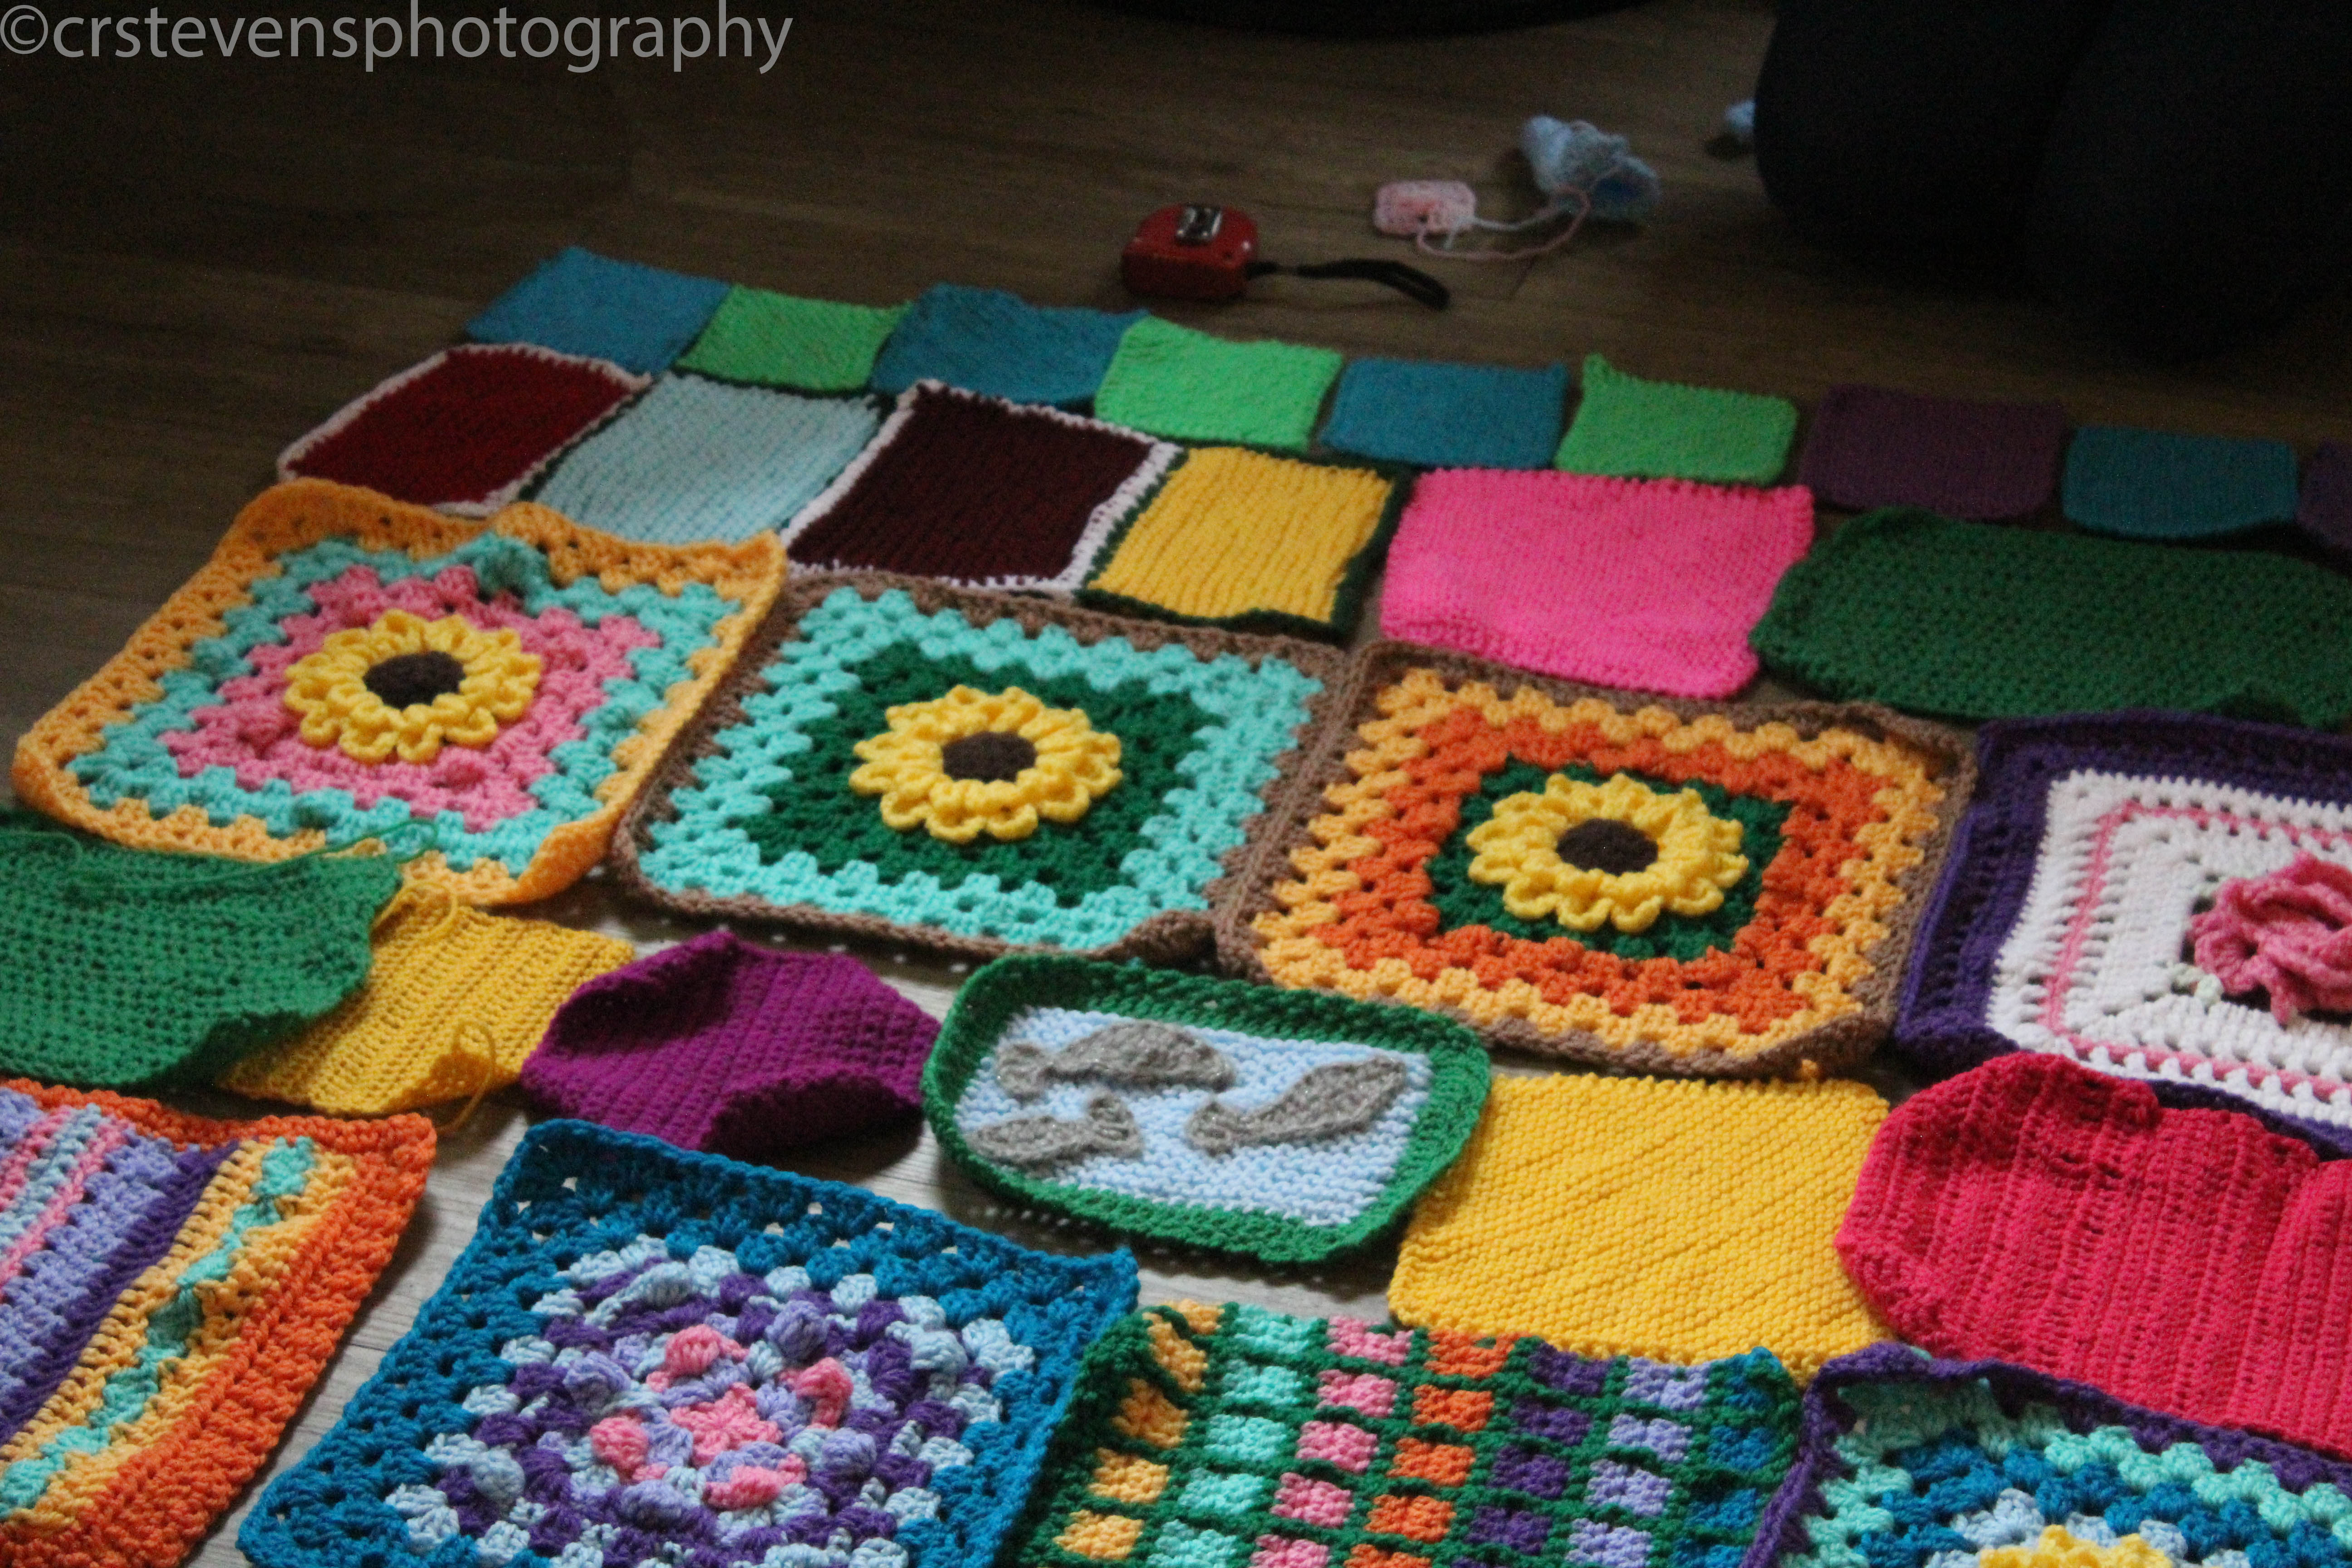 a closer up picture of some granny squares on the floor